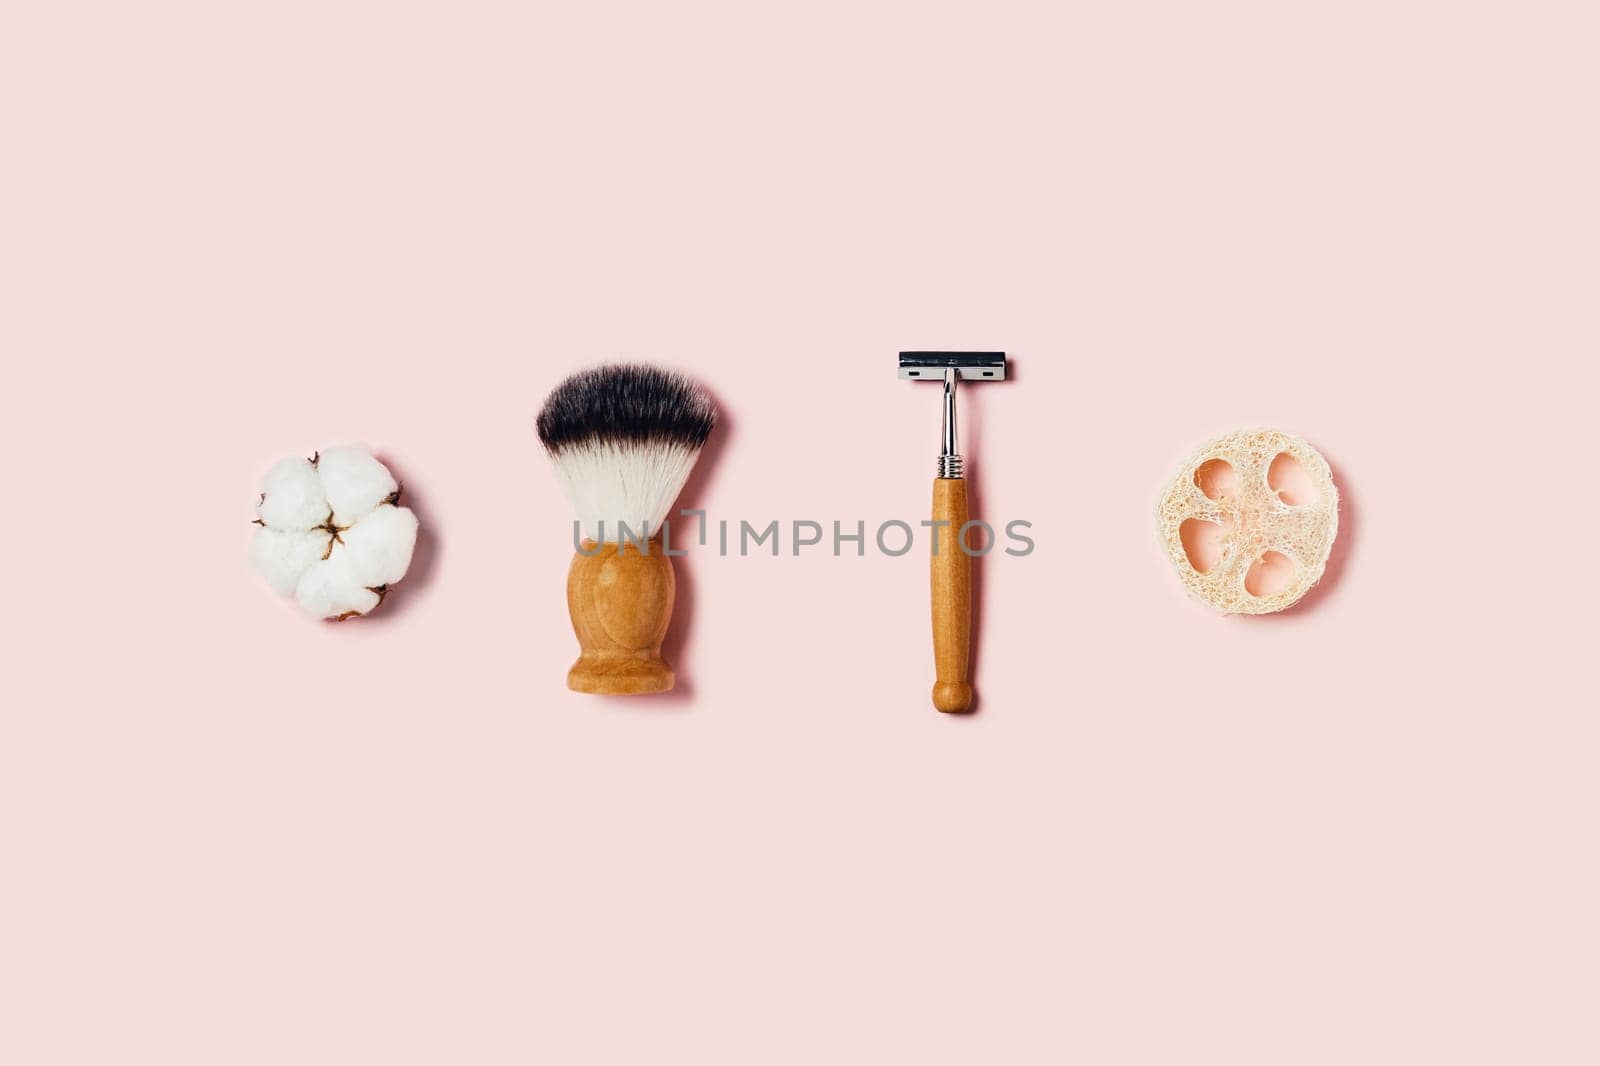 Natural bamboo sponge, shaver brush, razor and cotton flower on pink background. Flat lay, top view.